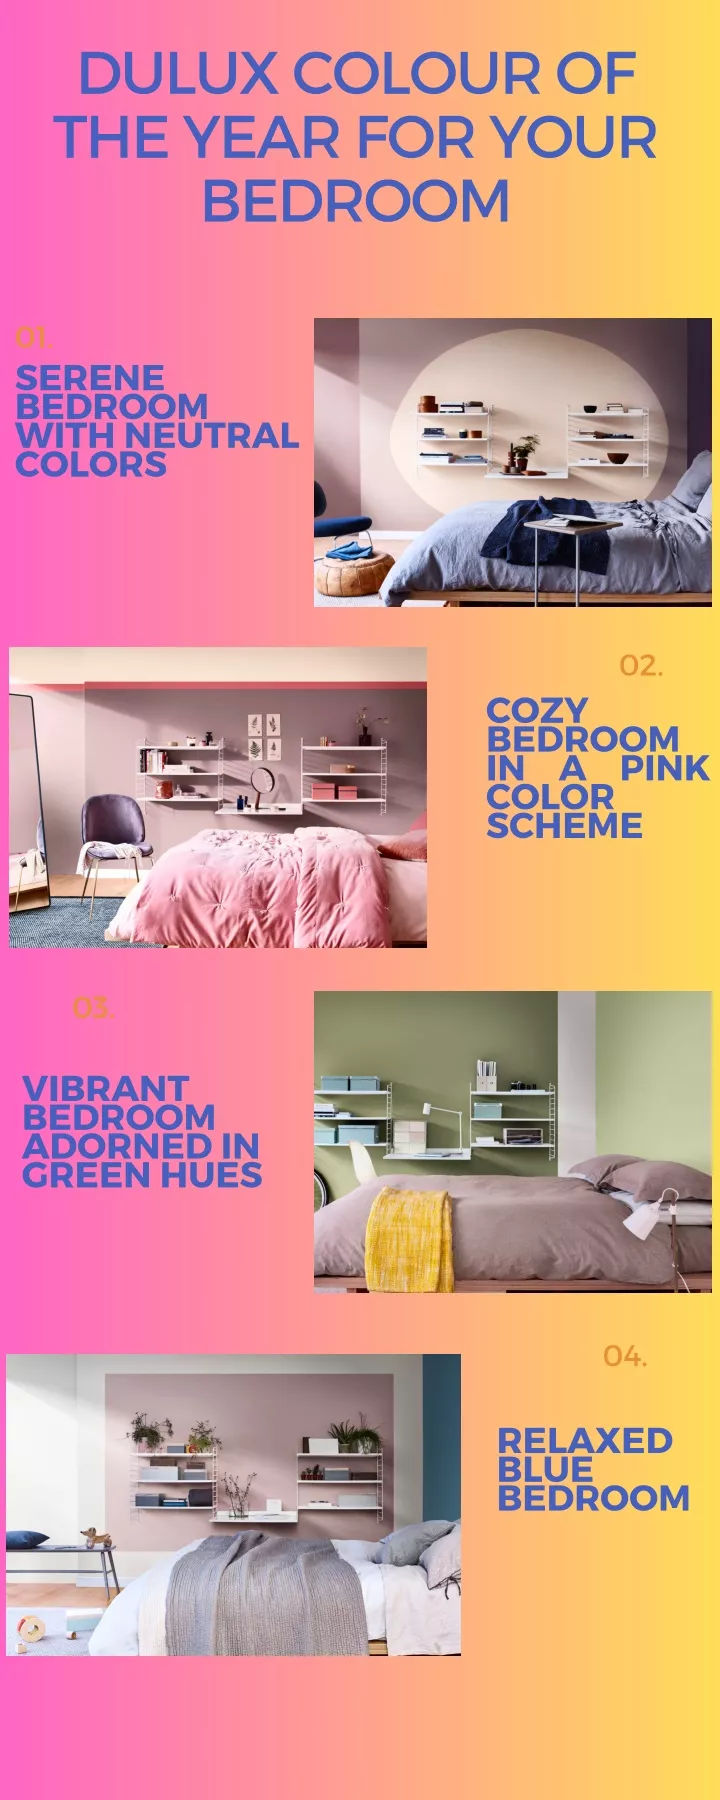 dulux colour of the year for your bedroom